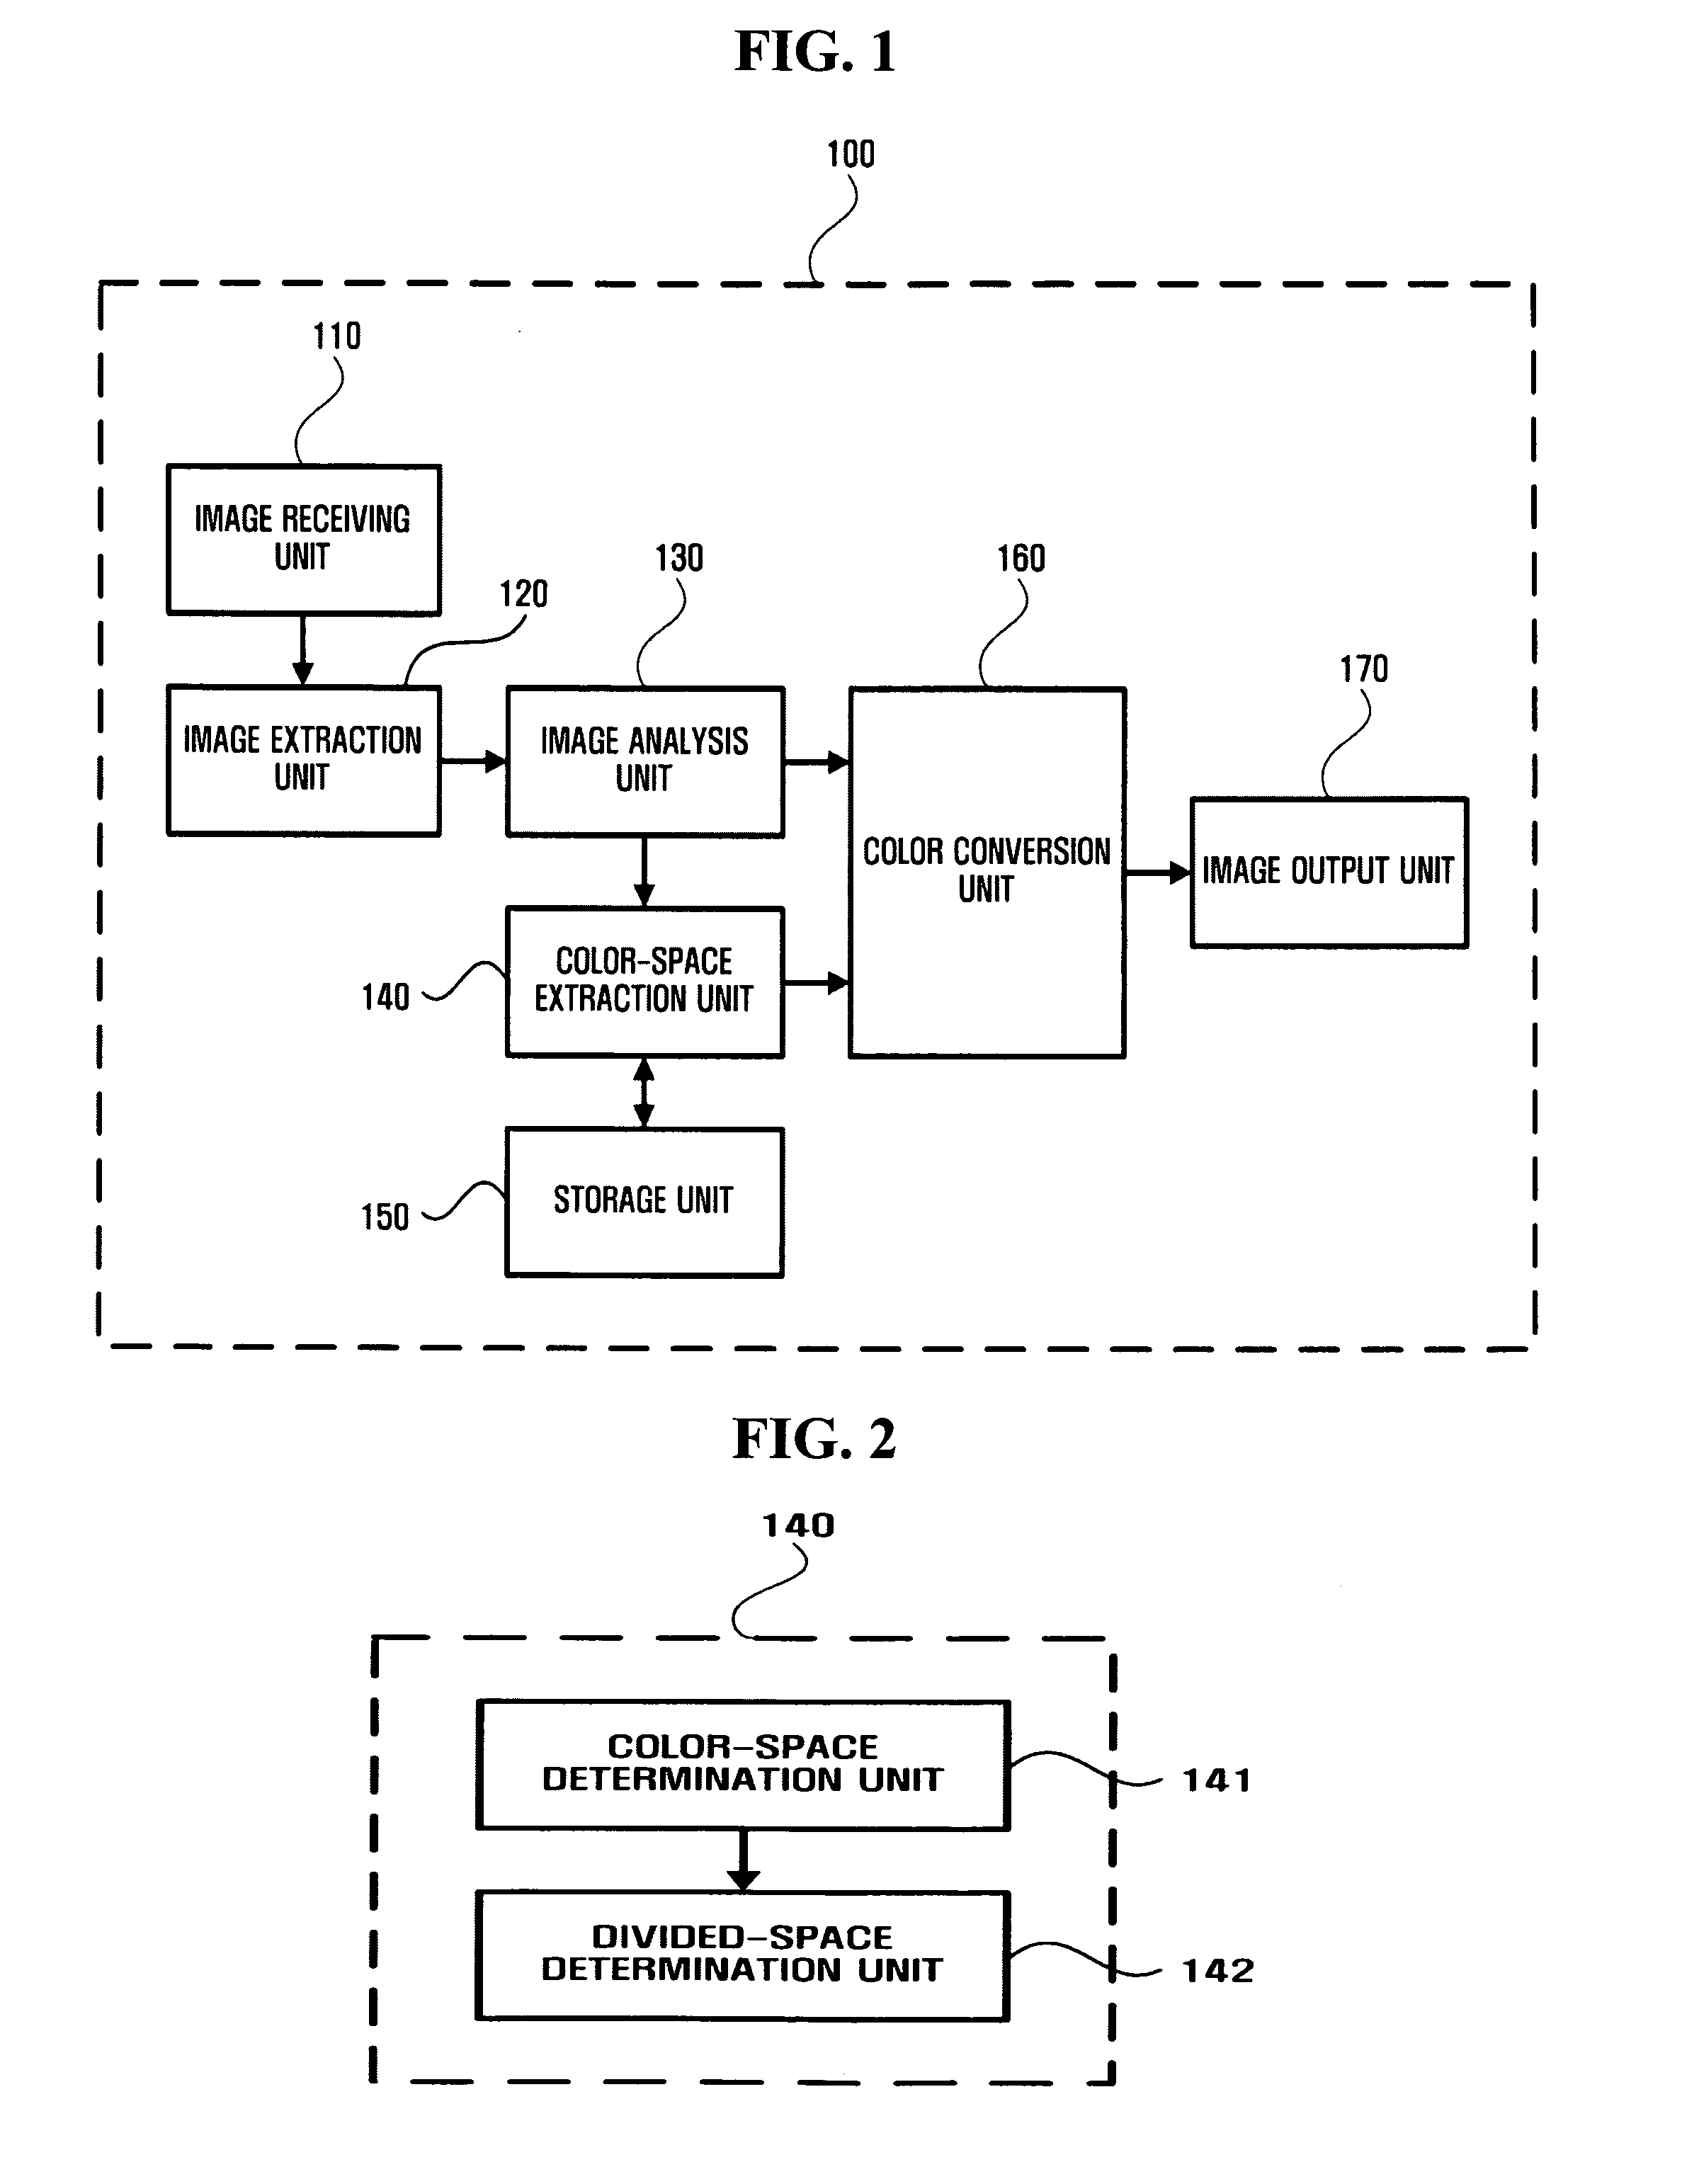 Apparatus and method for converting preference color